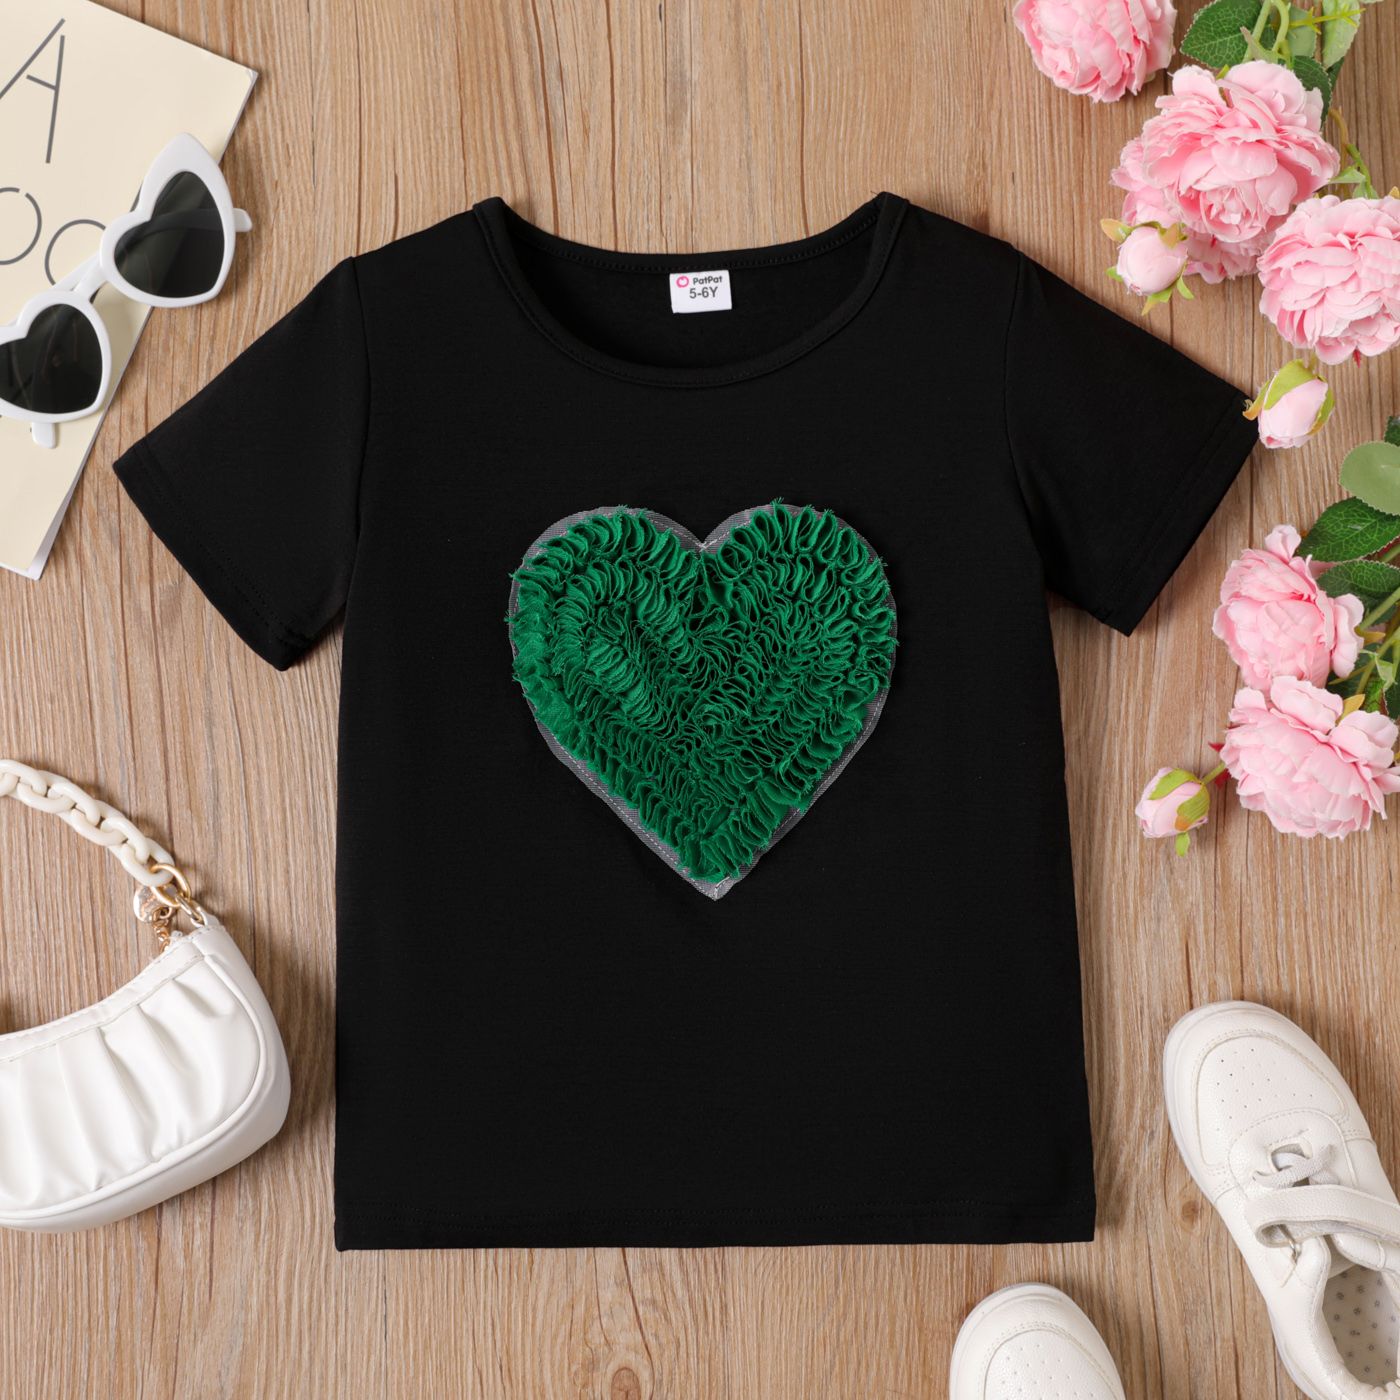 Kid Girl Heart/Butterfly Embroidered Short-sleeve Tee